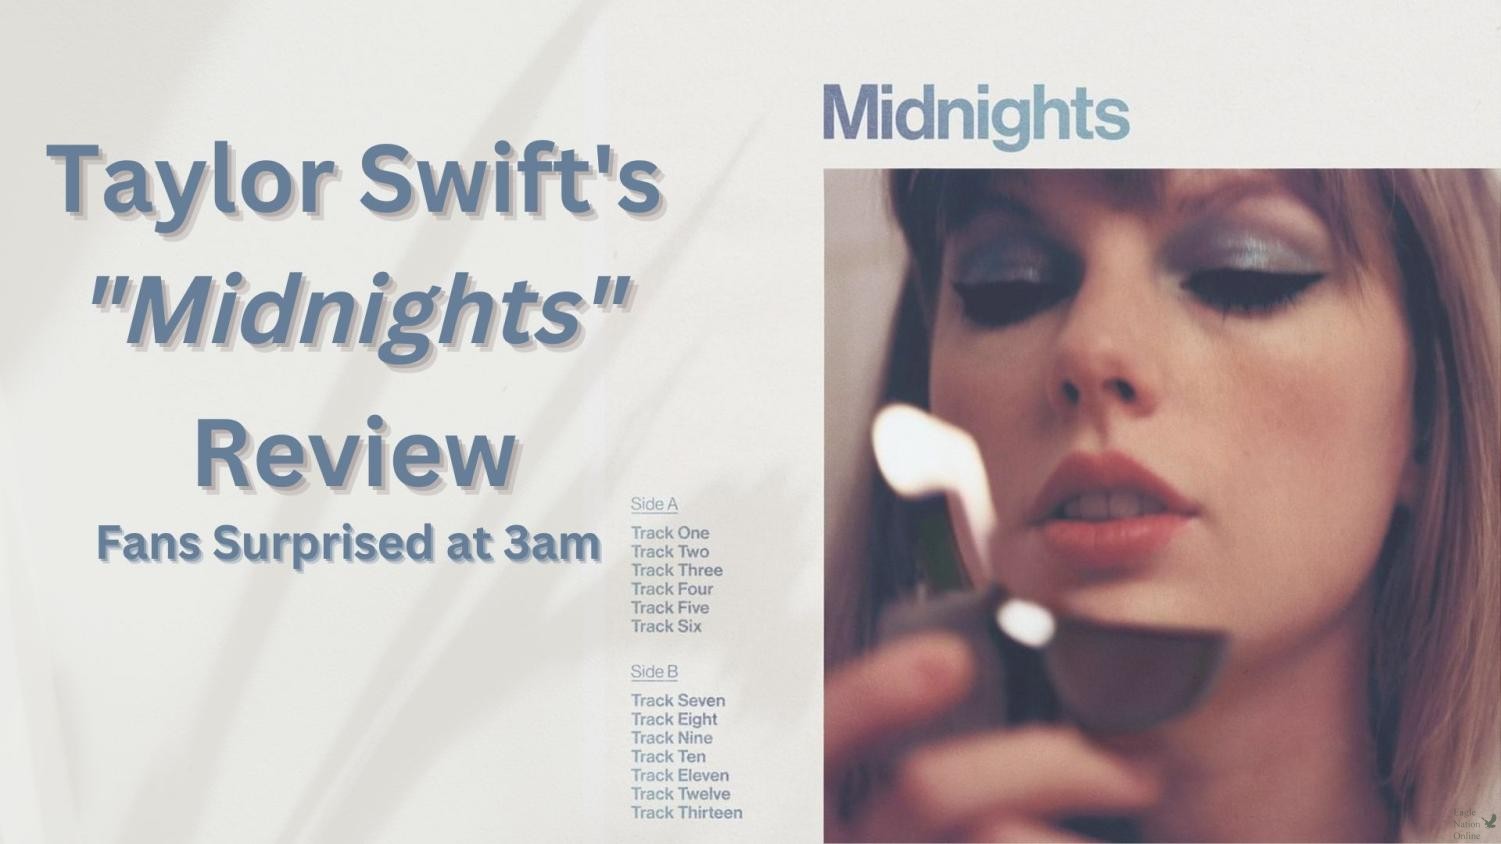 Taylor Swift drops '3am' edition of 'Midnights,' music video